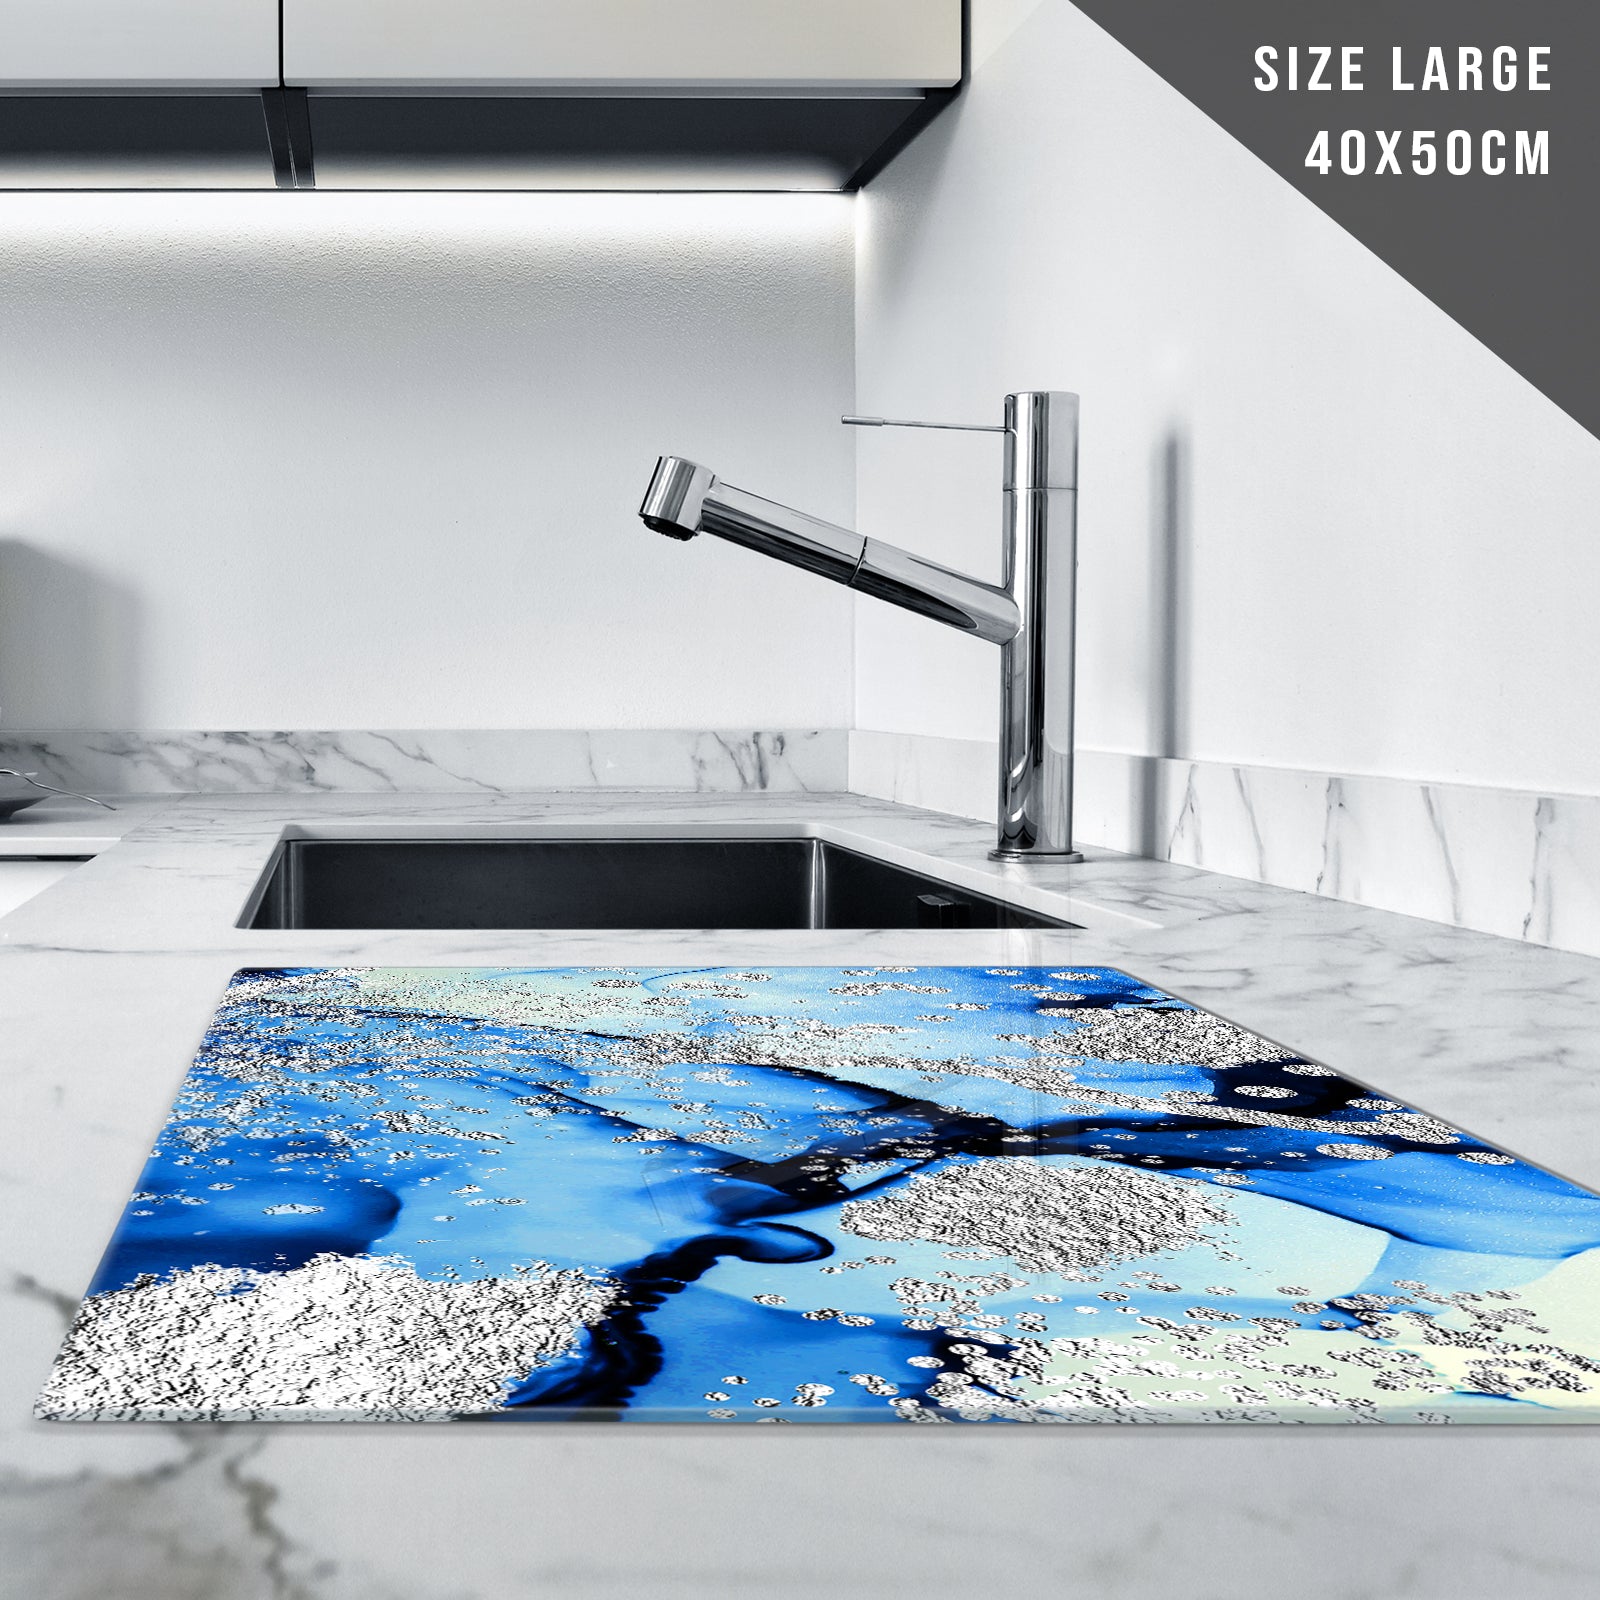 Glass Chopping Board for Kitchen in Blue Black Silver Design